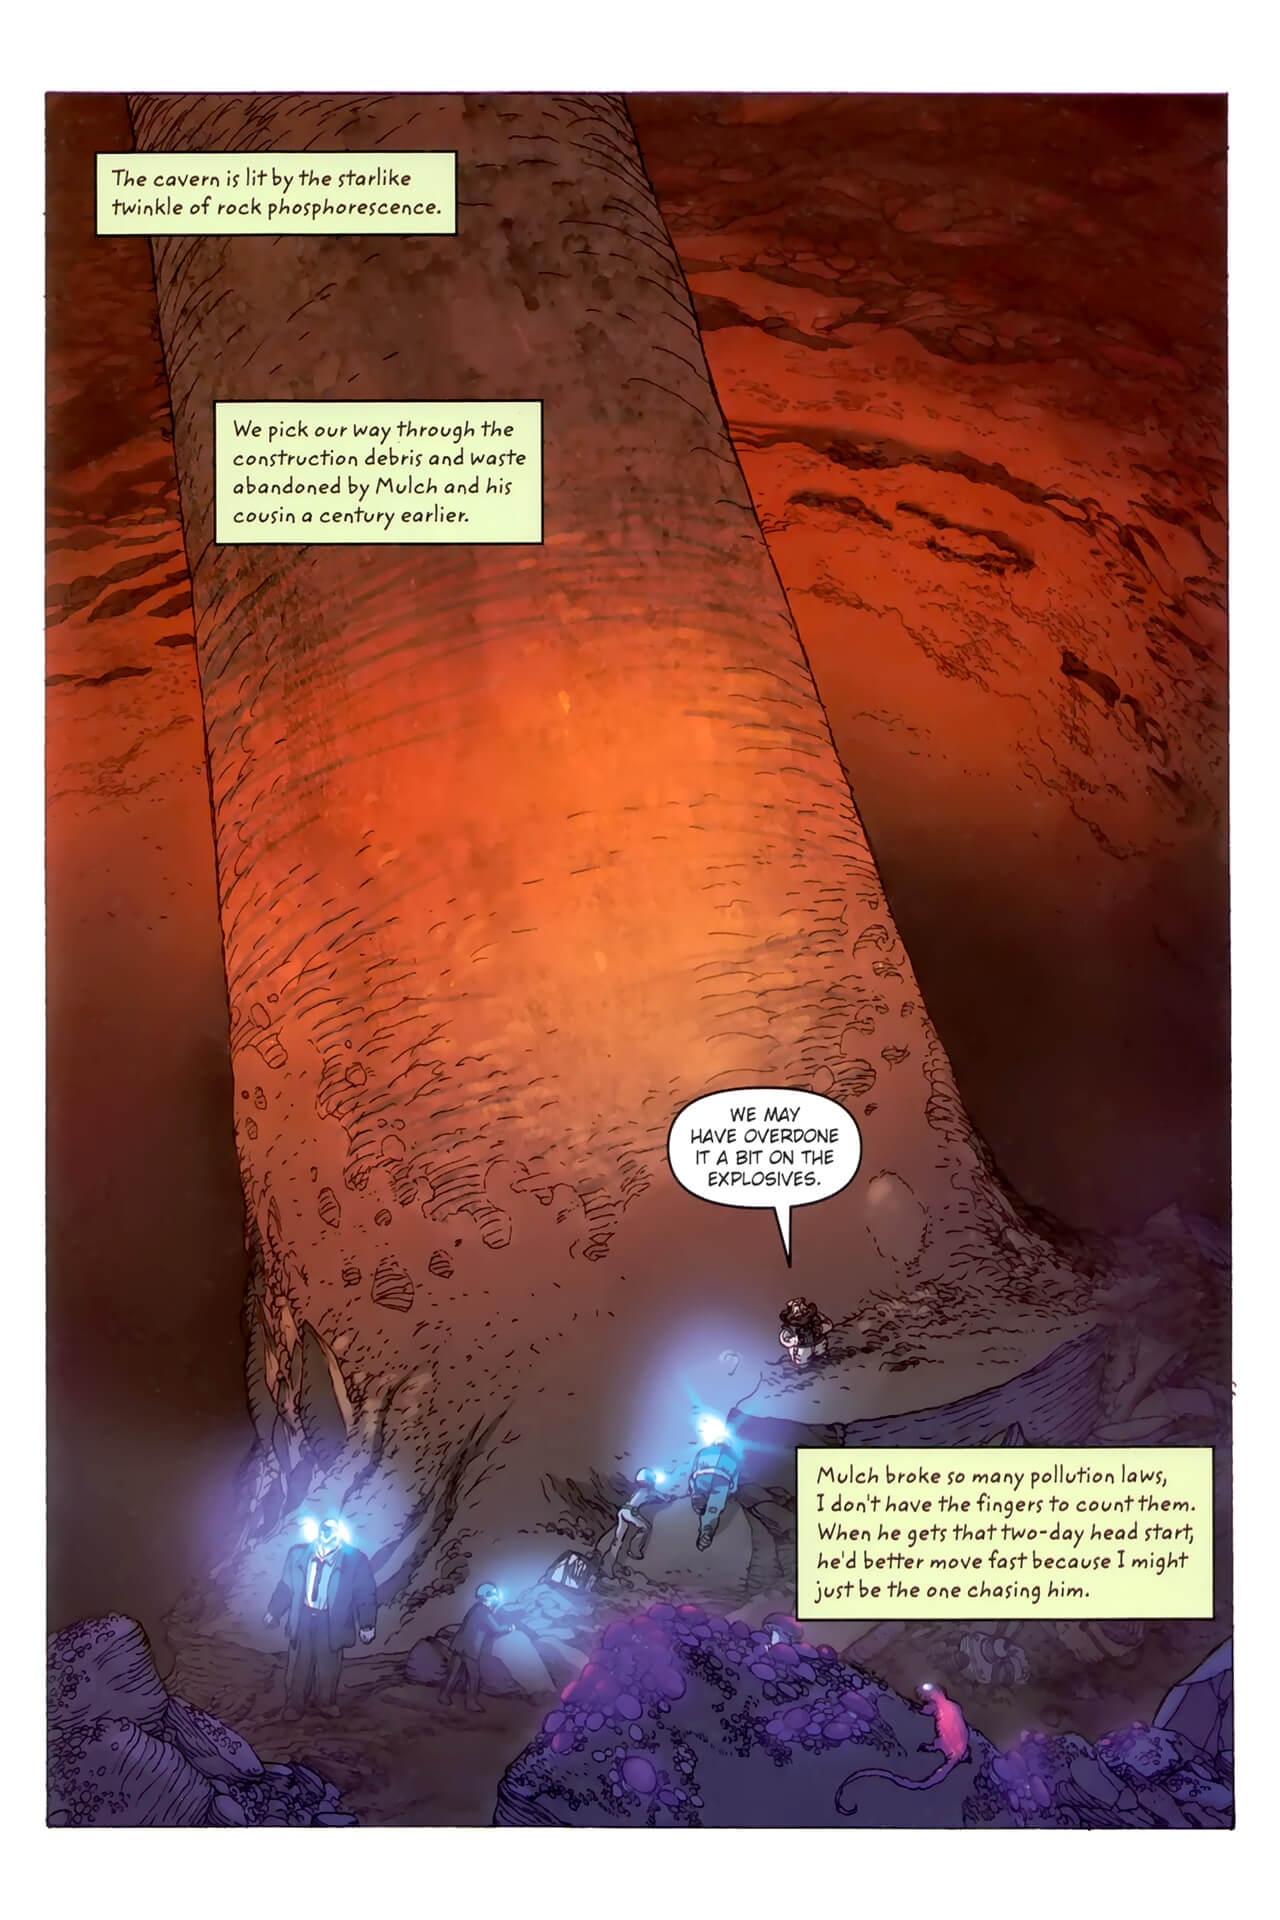 page 99 of artemis fowl the arctic incident graphic novel